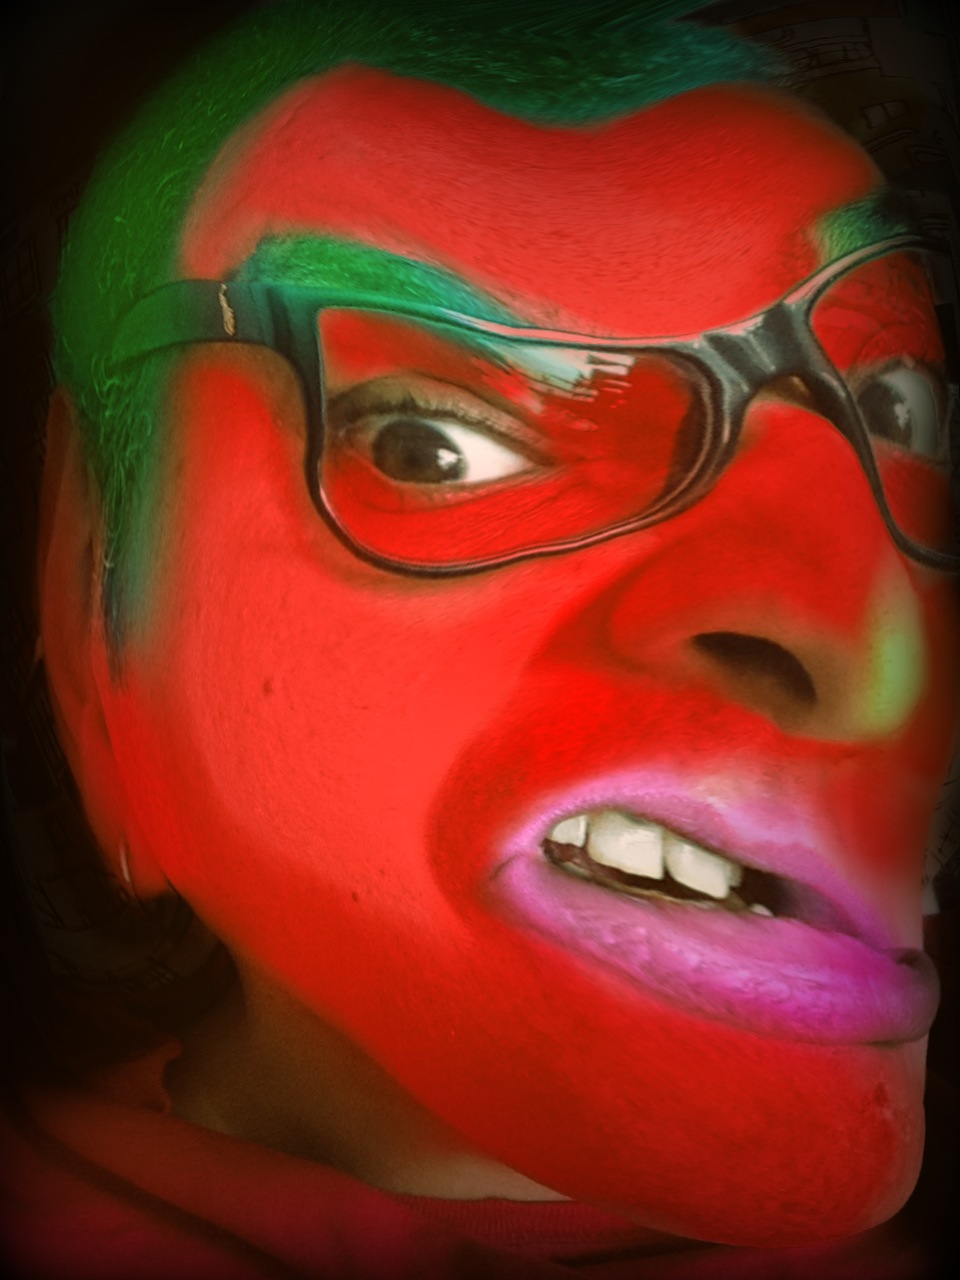 an image of a man that has painted his face green and red